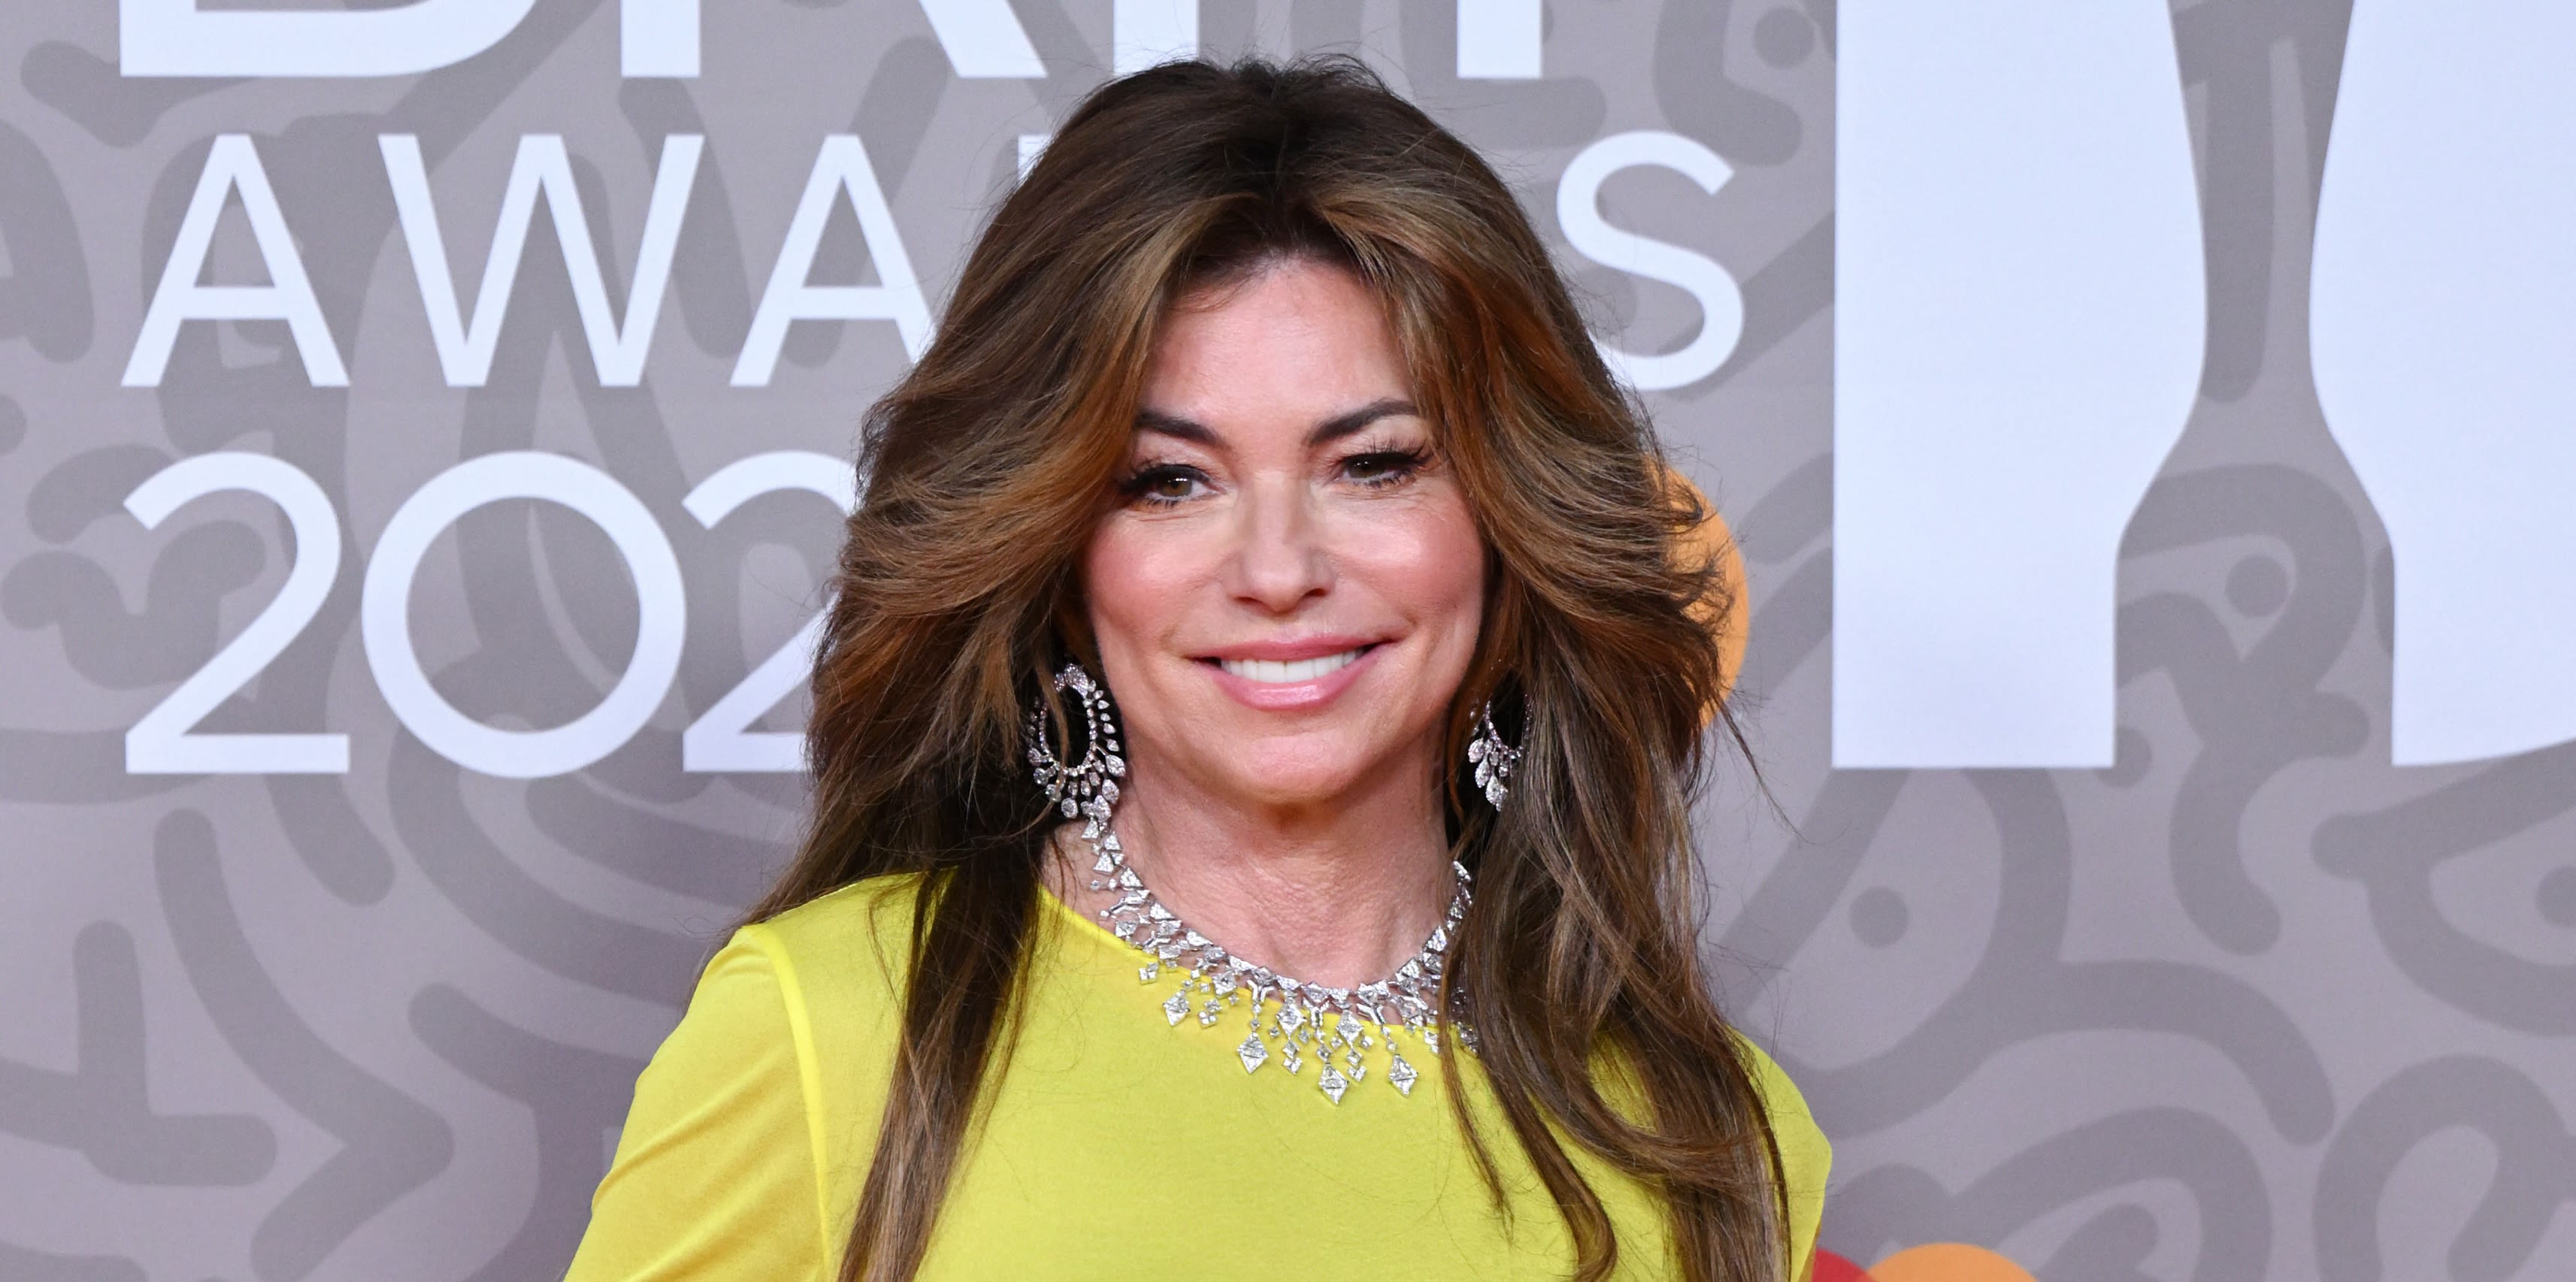 Shania Twain uses this surprising product to keep her skin and hair hydrated while traveling